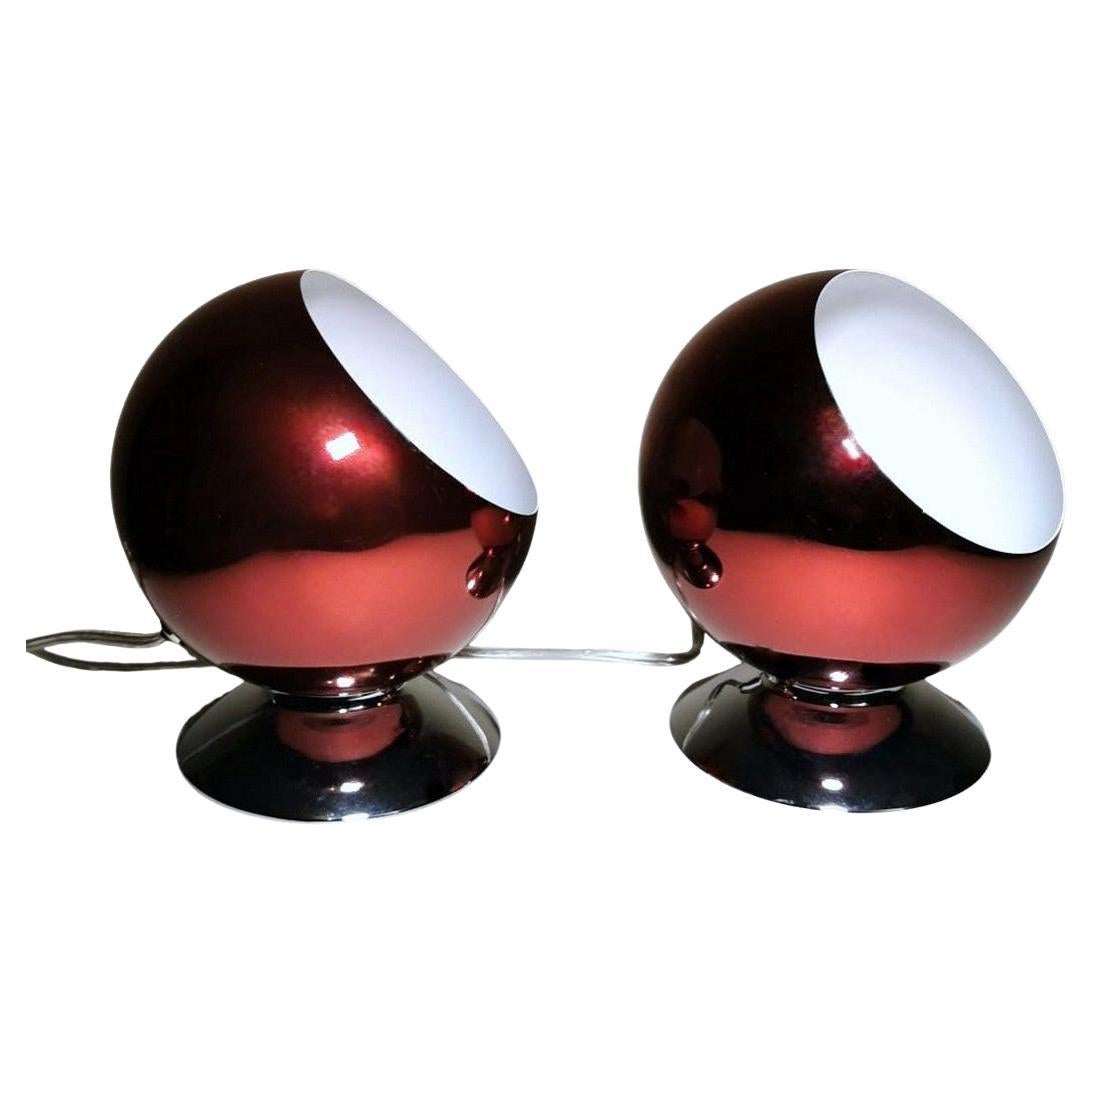 Space Age Design Eye Ball Gepo Pair of Dutch Colored Aluminum Abat-Jour